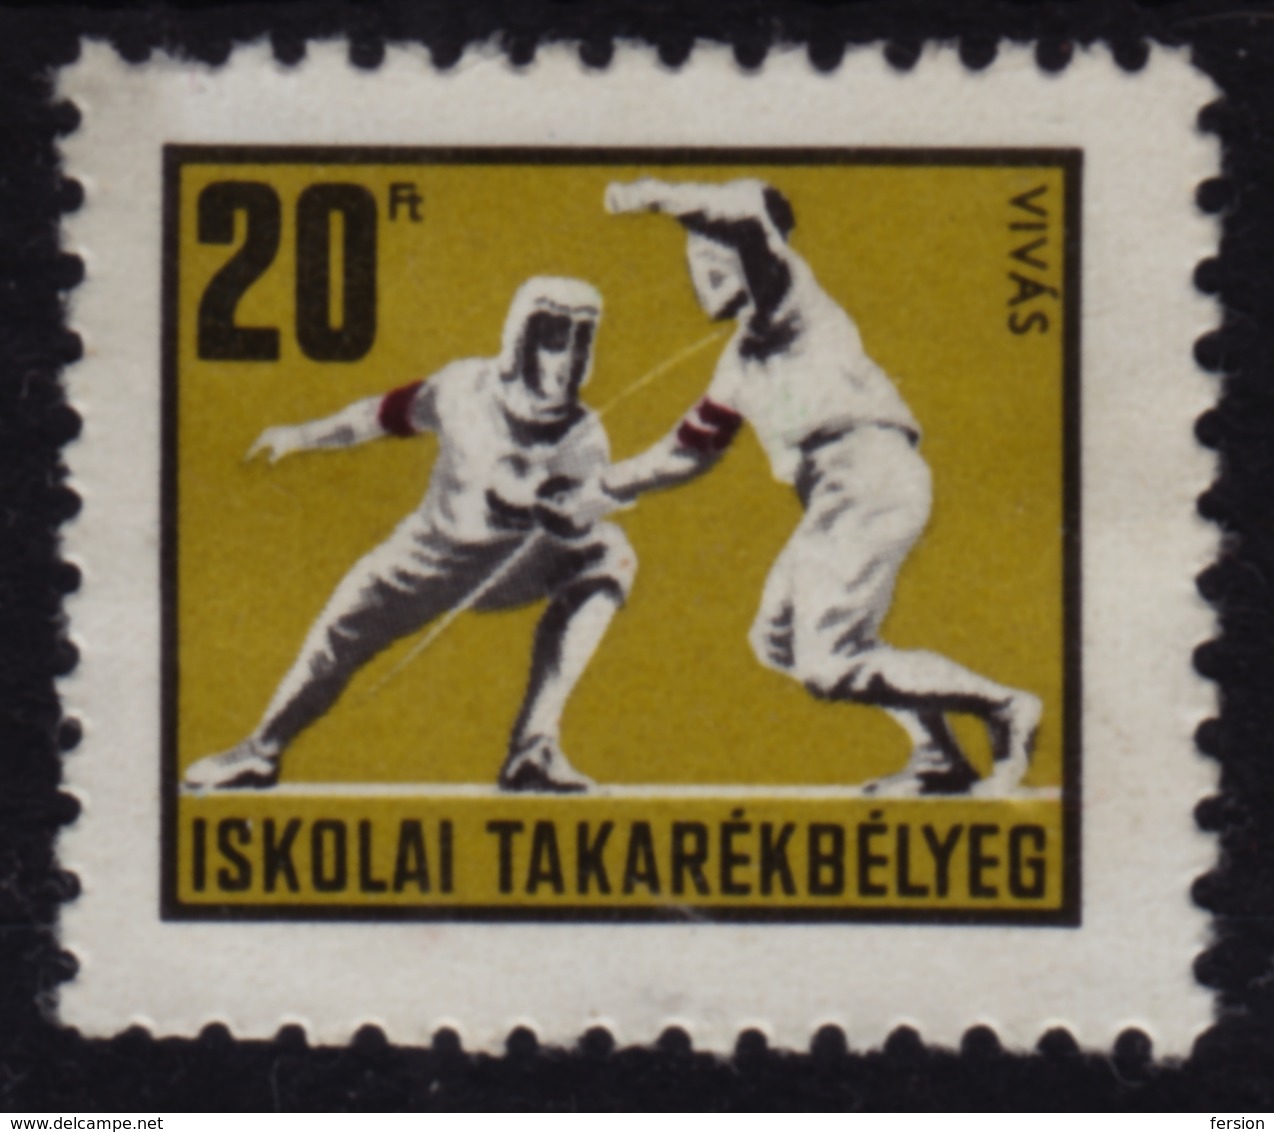 FENCING - School Bank / Children Savings Stamps / Revenue Stamp - 1970's HUNGARY - Used - Fencing